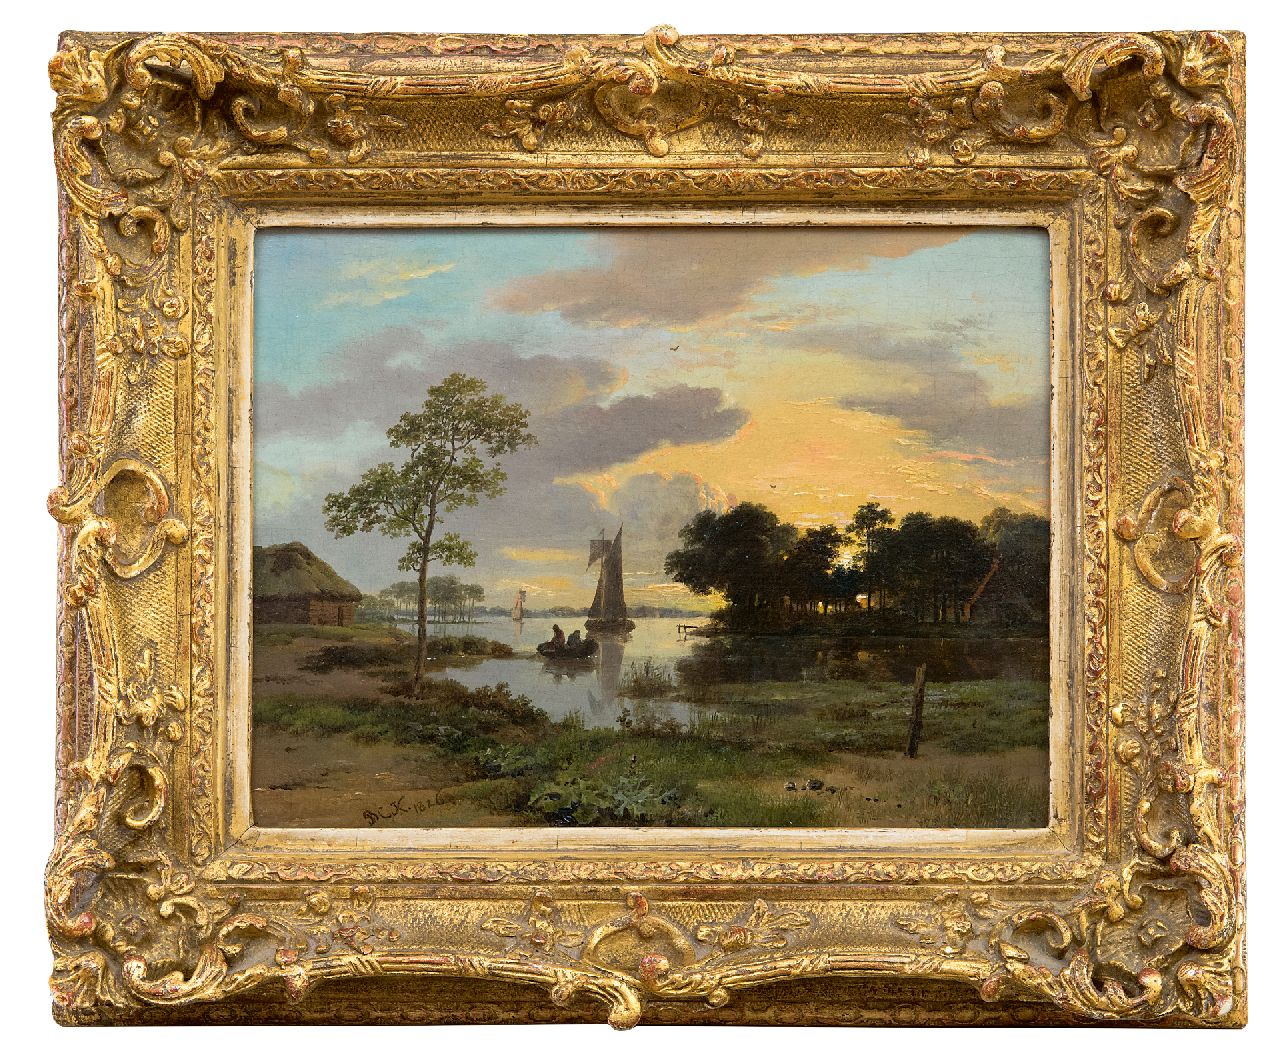 Koekkoek B.C.  | Barend Cornelis Koekkoek | Paintings offered for sale | A riverscape at sunset, oil on panel 17.4 x 23.3 cm, signed l.l. with initials and dated 1826